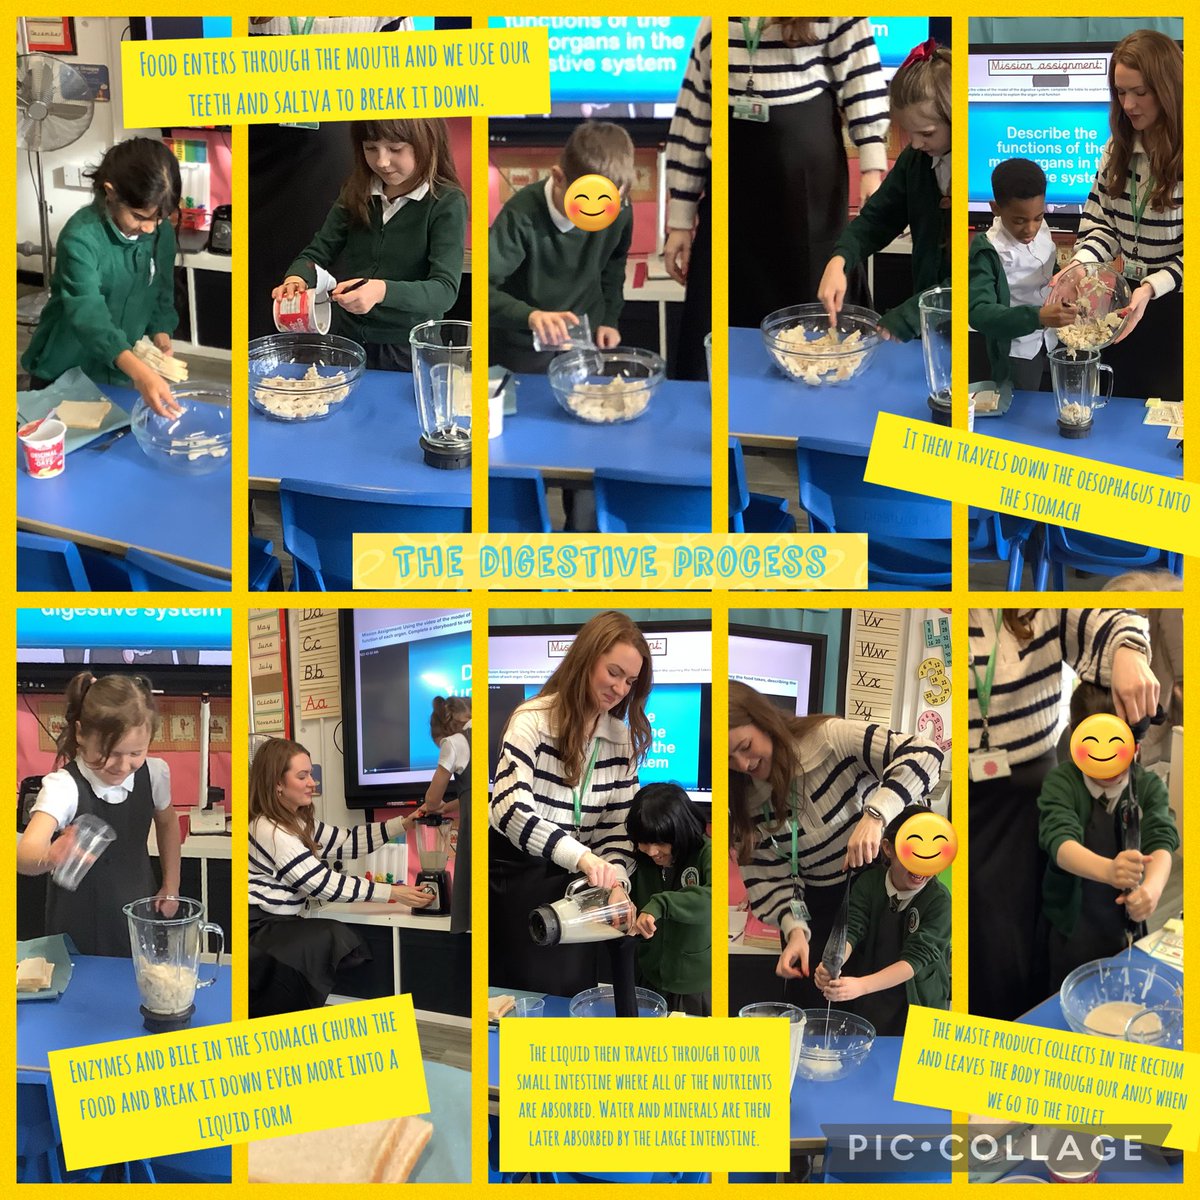 Today in Science we learned about the organs involved in the digestive process and how they function. Together we modelled each stage of digestion to help our understanding! #sjsbscience @DevelopExperts